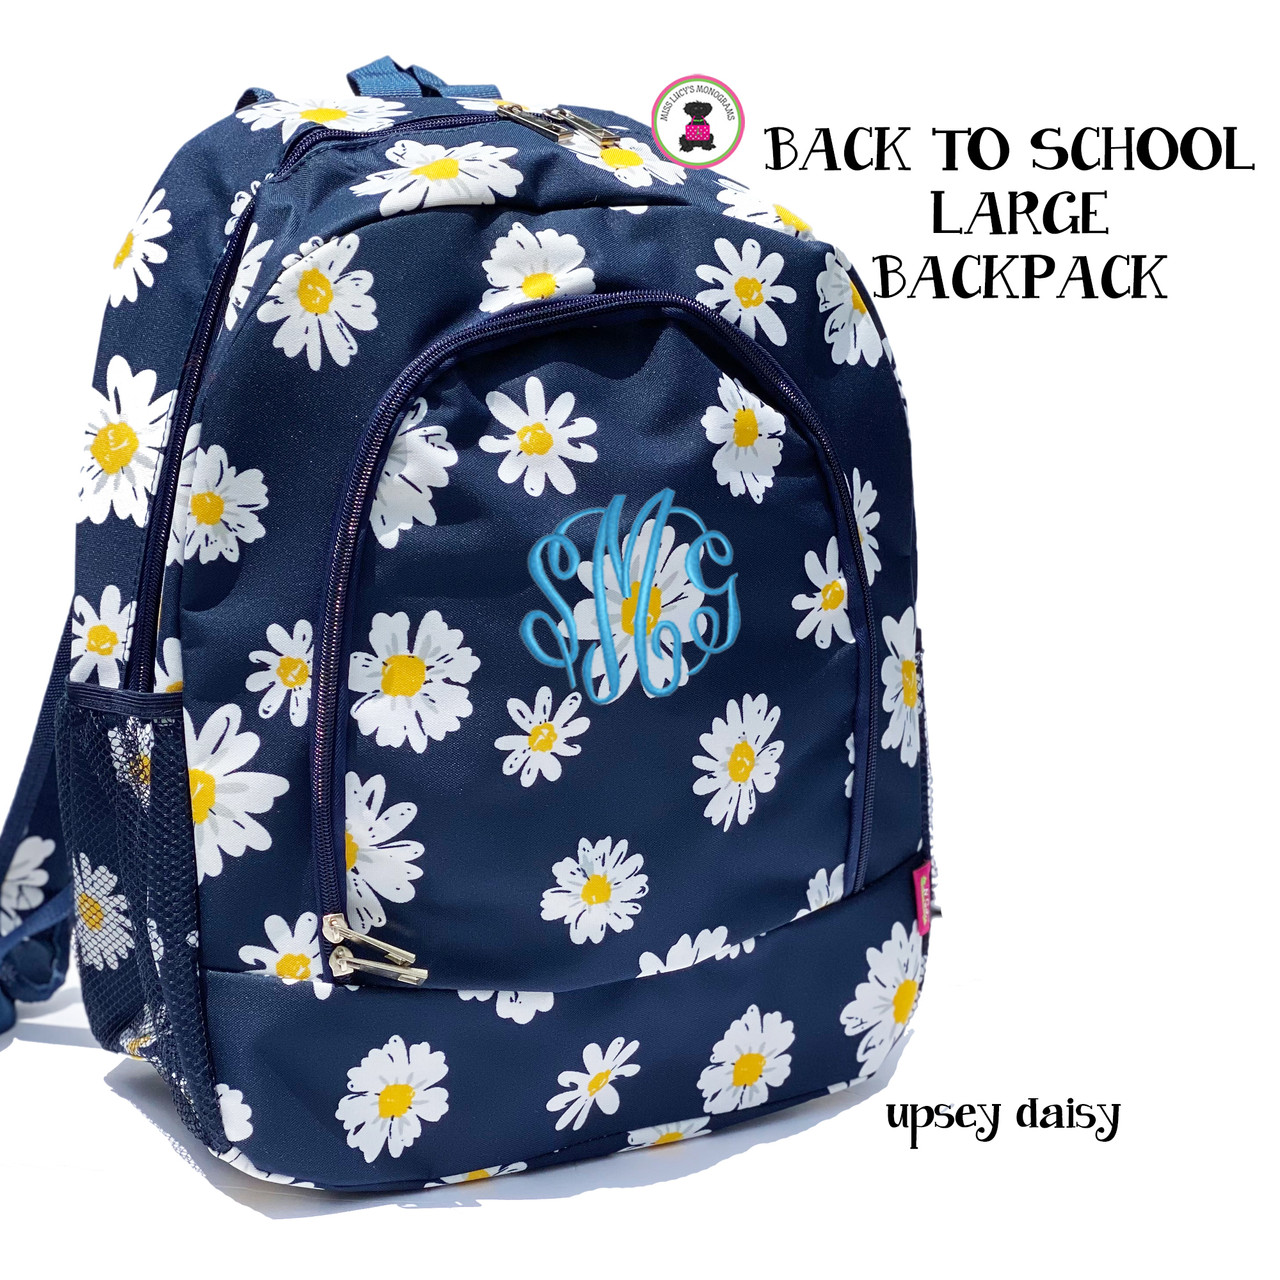 FOR HER Back to School Monogrammed Large Canvas Backpack-Upsy Daisy-Free  Ship/Children Backpack/Birthday/Travel Backpack/Weekend Backpack/Back to  School - Miss Lucy's Monograms